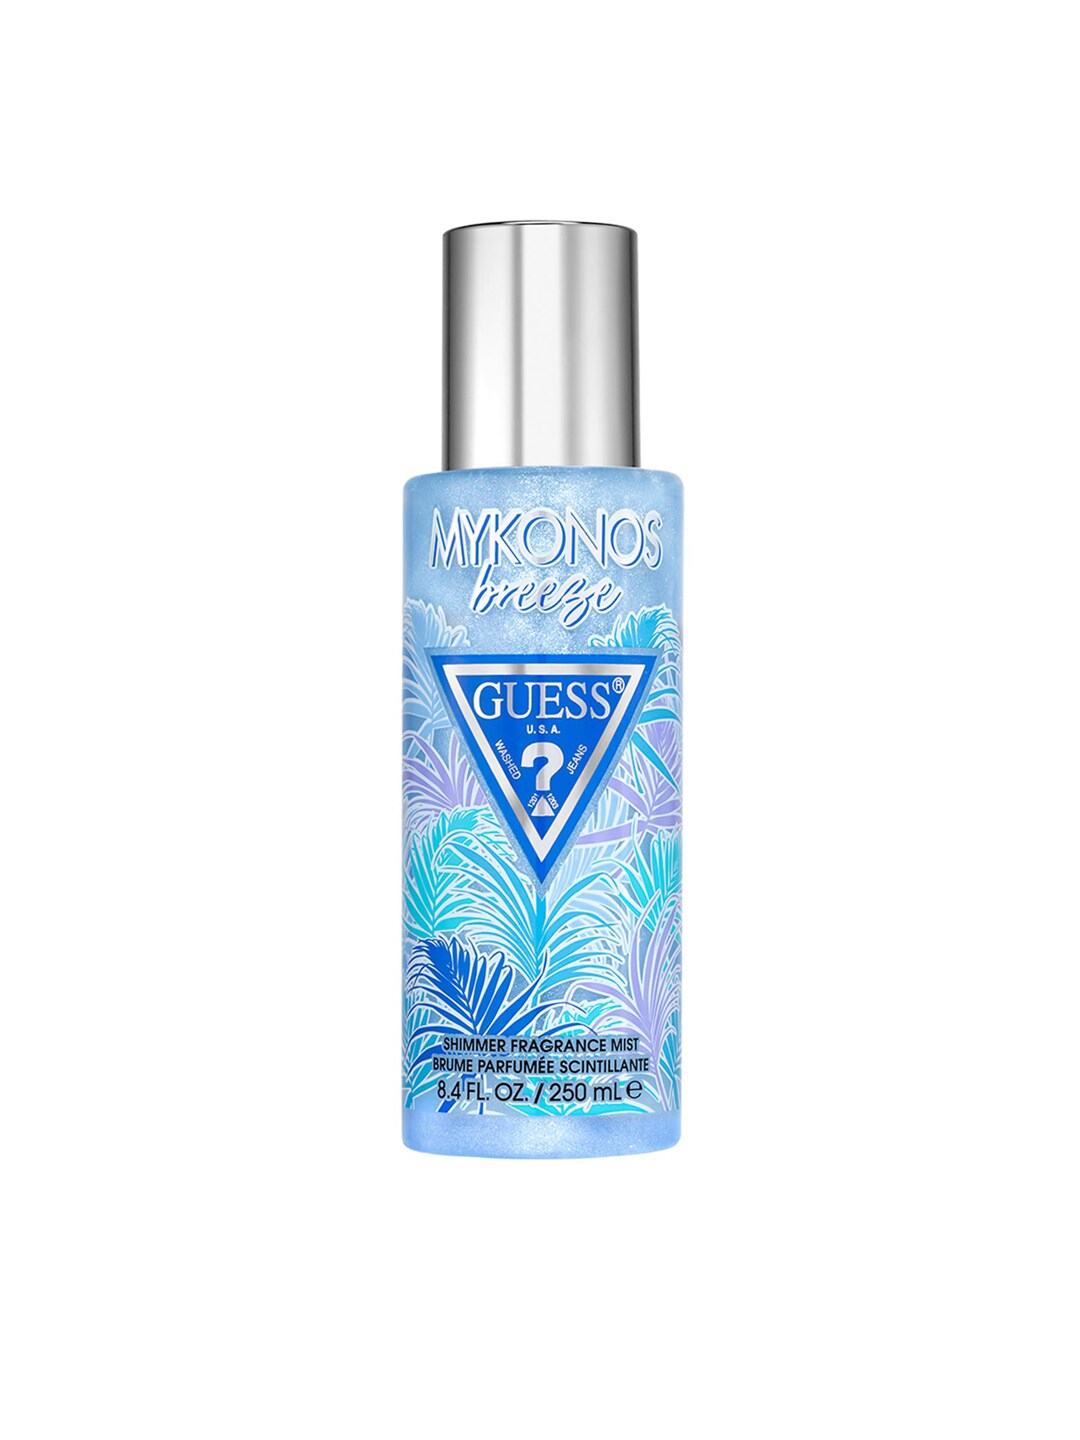 Guess Destination Mykonos Breeze Shimmer Fragrance Body Mist 250 ml Price in India